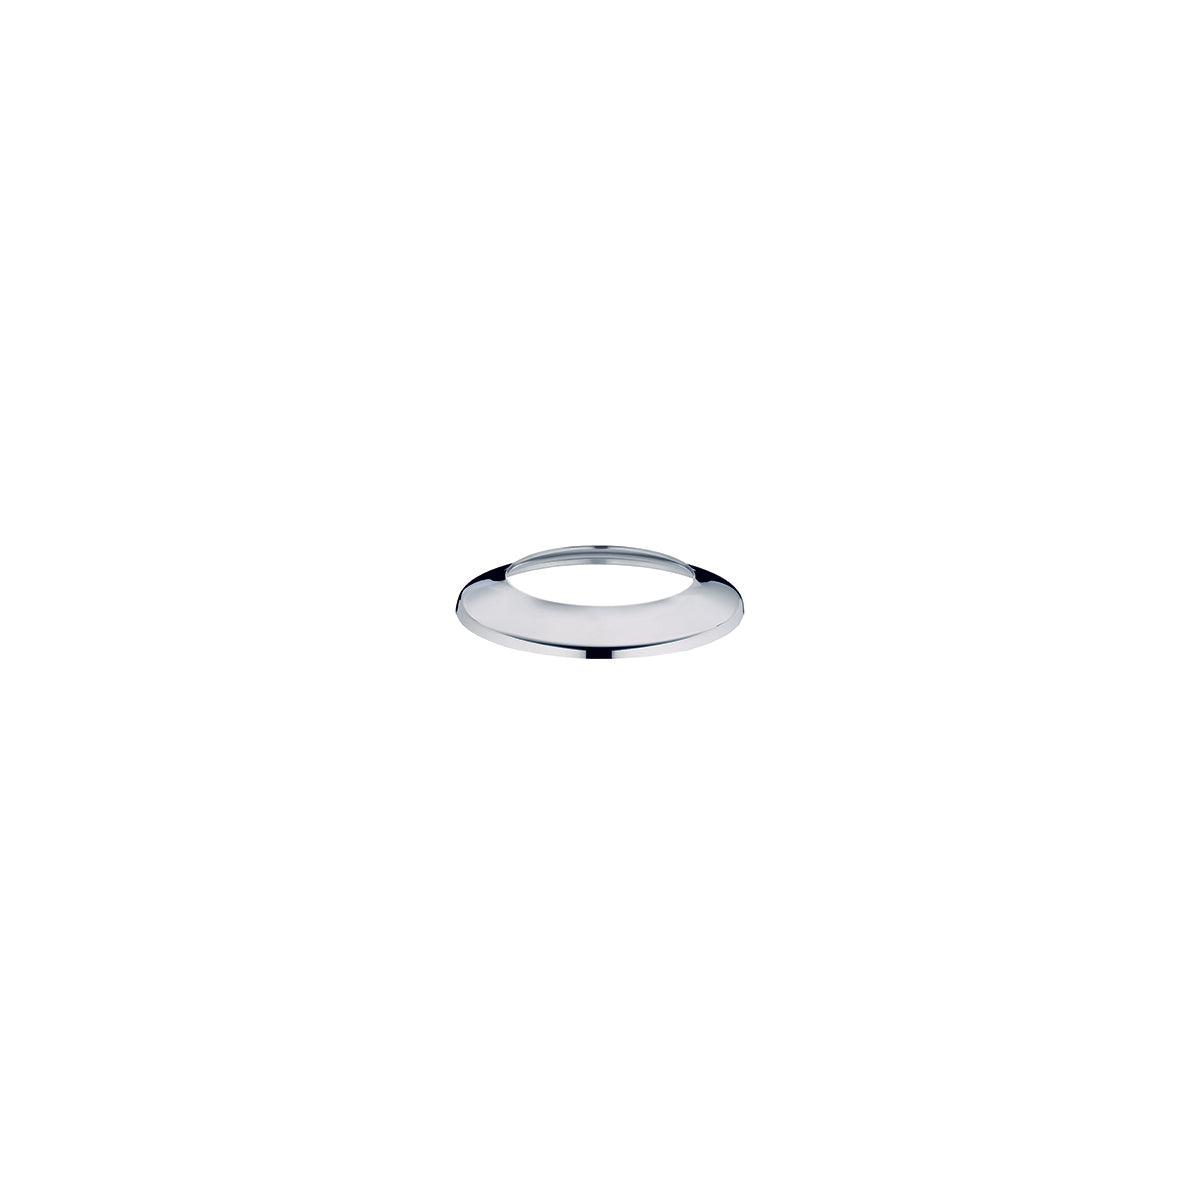 06.3853.6045 WMF Classic ChillCup Ring Stainless Steel Tomkin Australia Hospitality Supplies